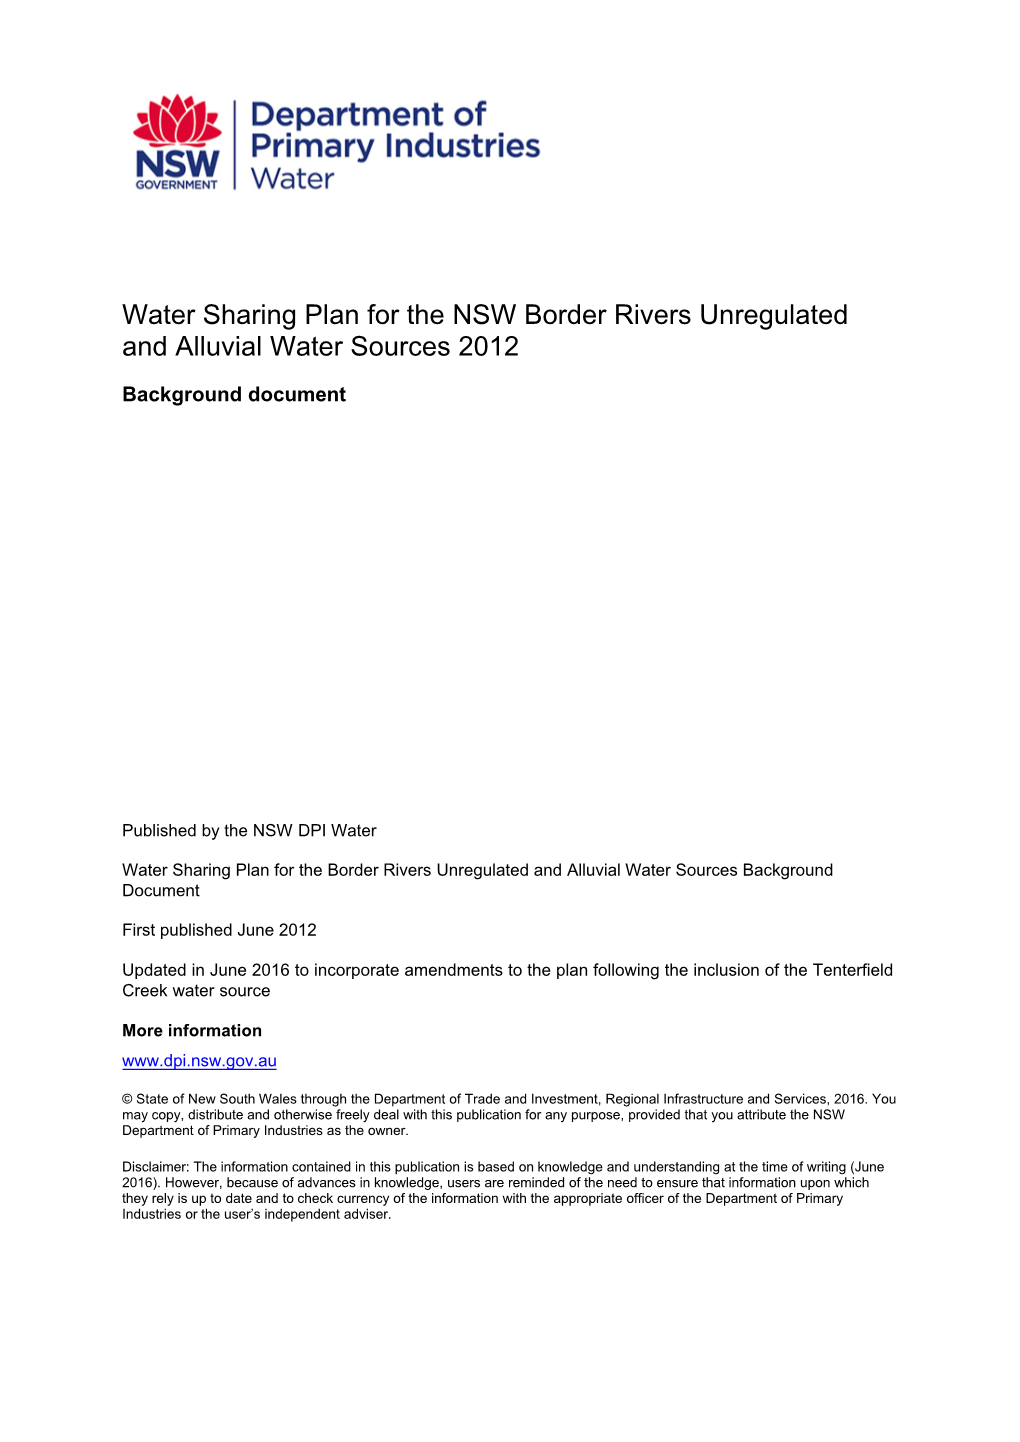 Water Sharing Plan for the NSW Border Rivers Unregulated and Alluvial Water Sources 2012